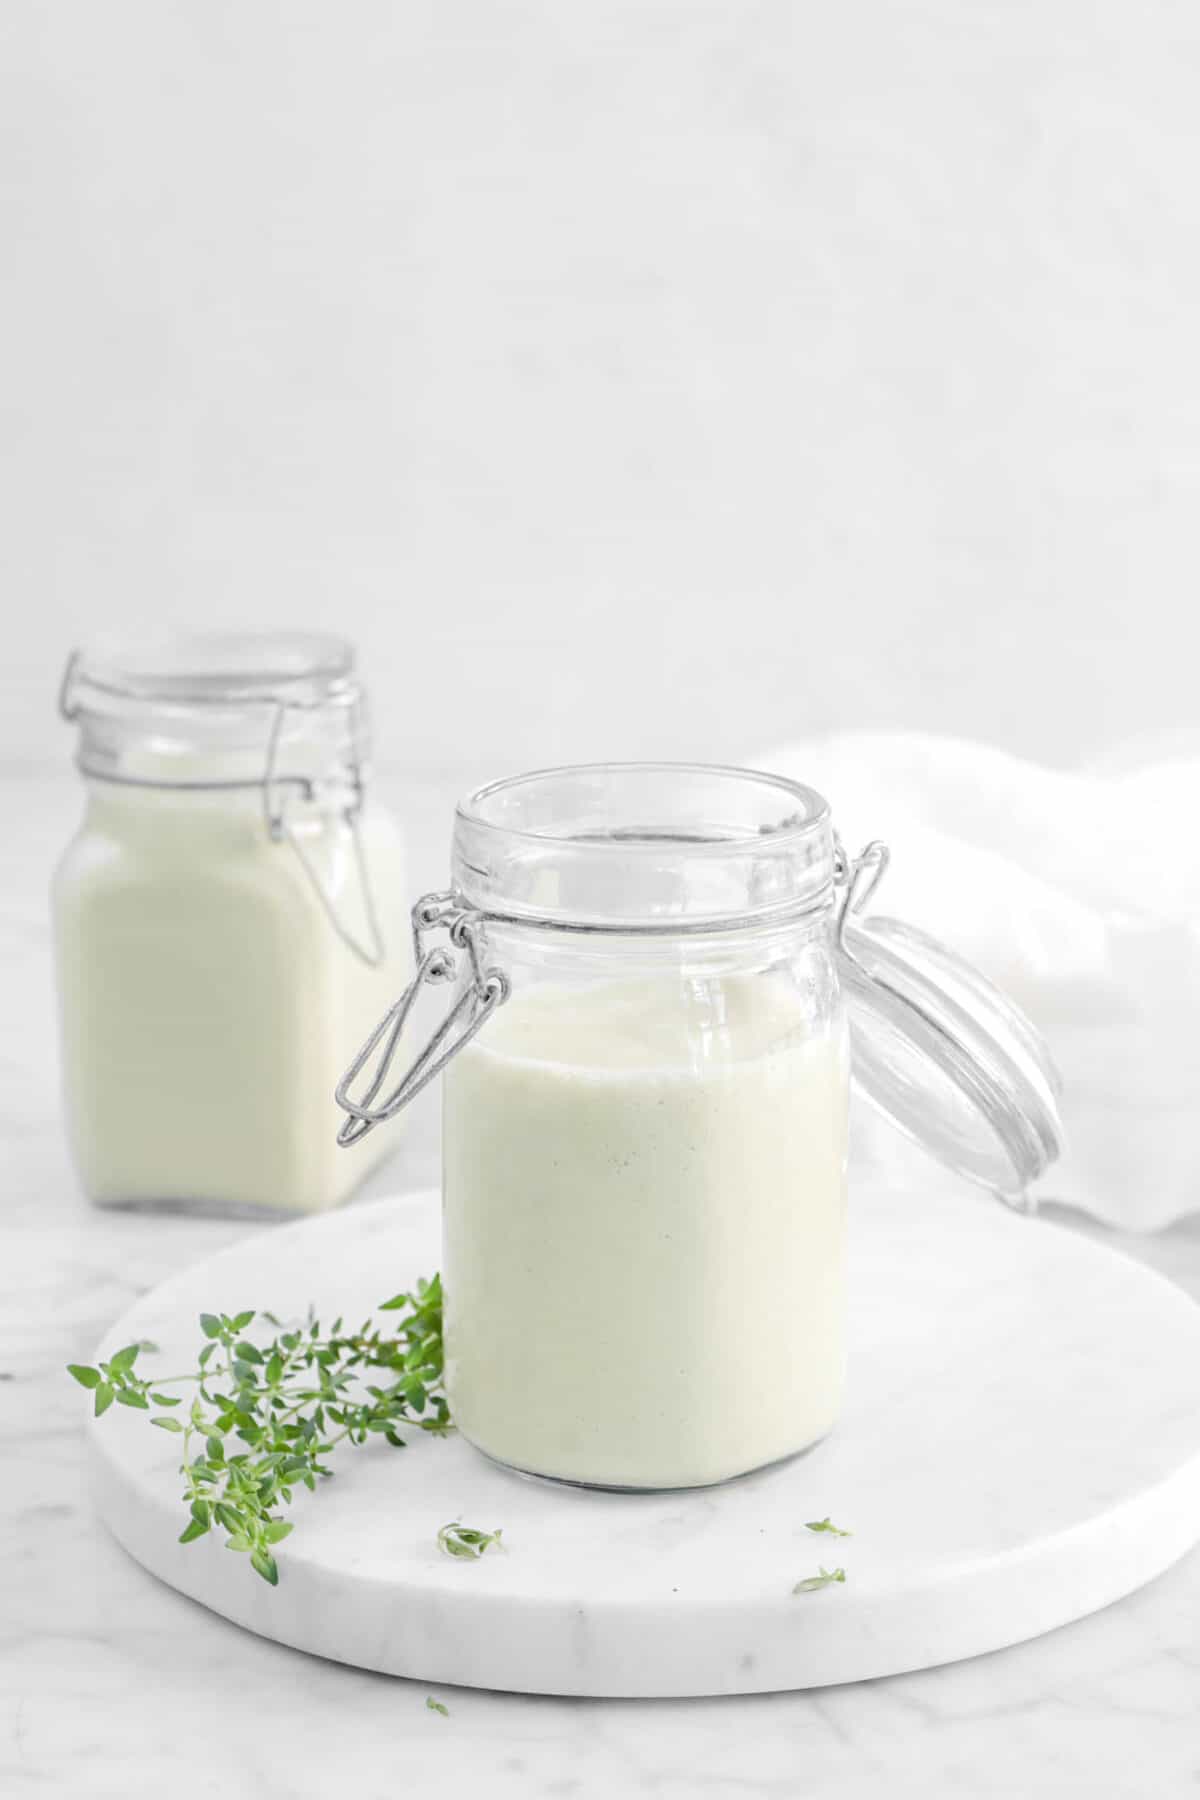 cream of celery soup in two jars with thyme